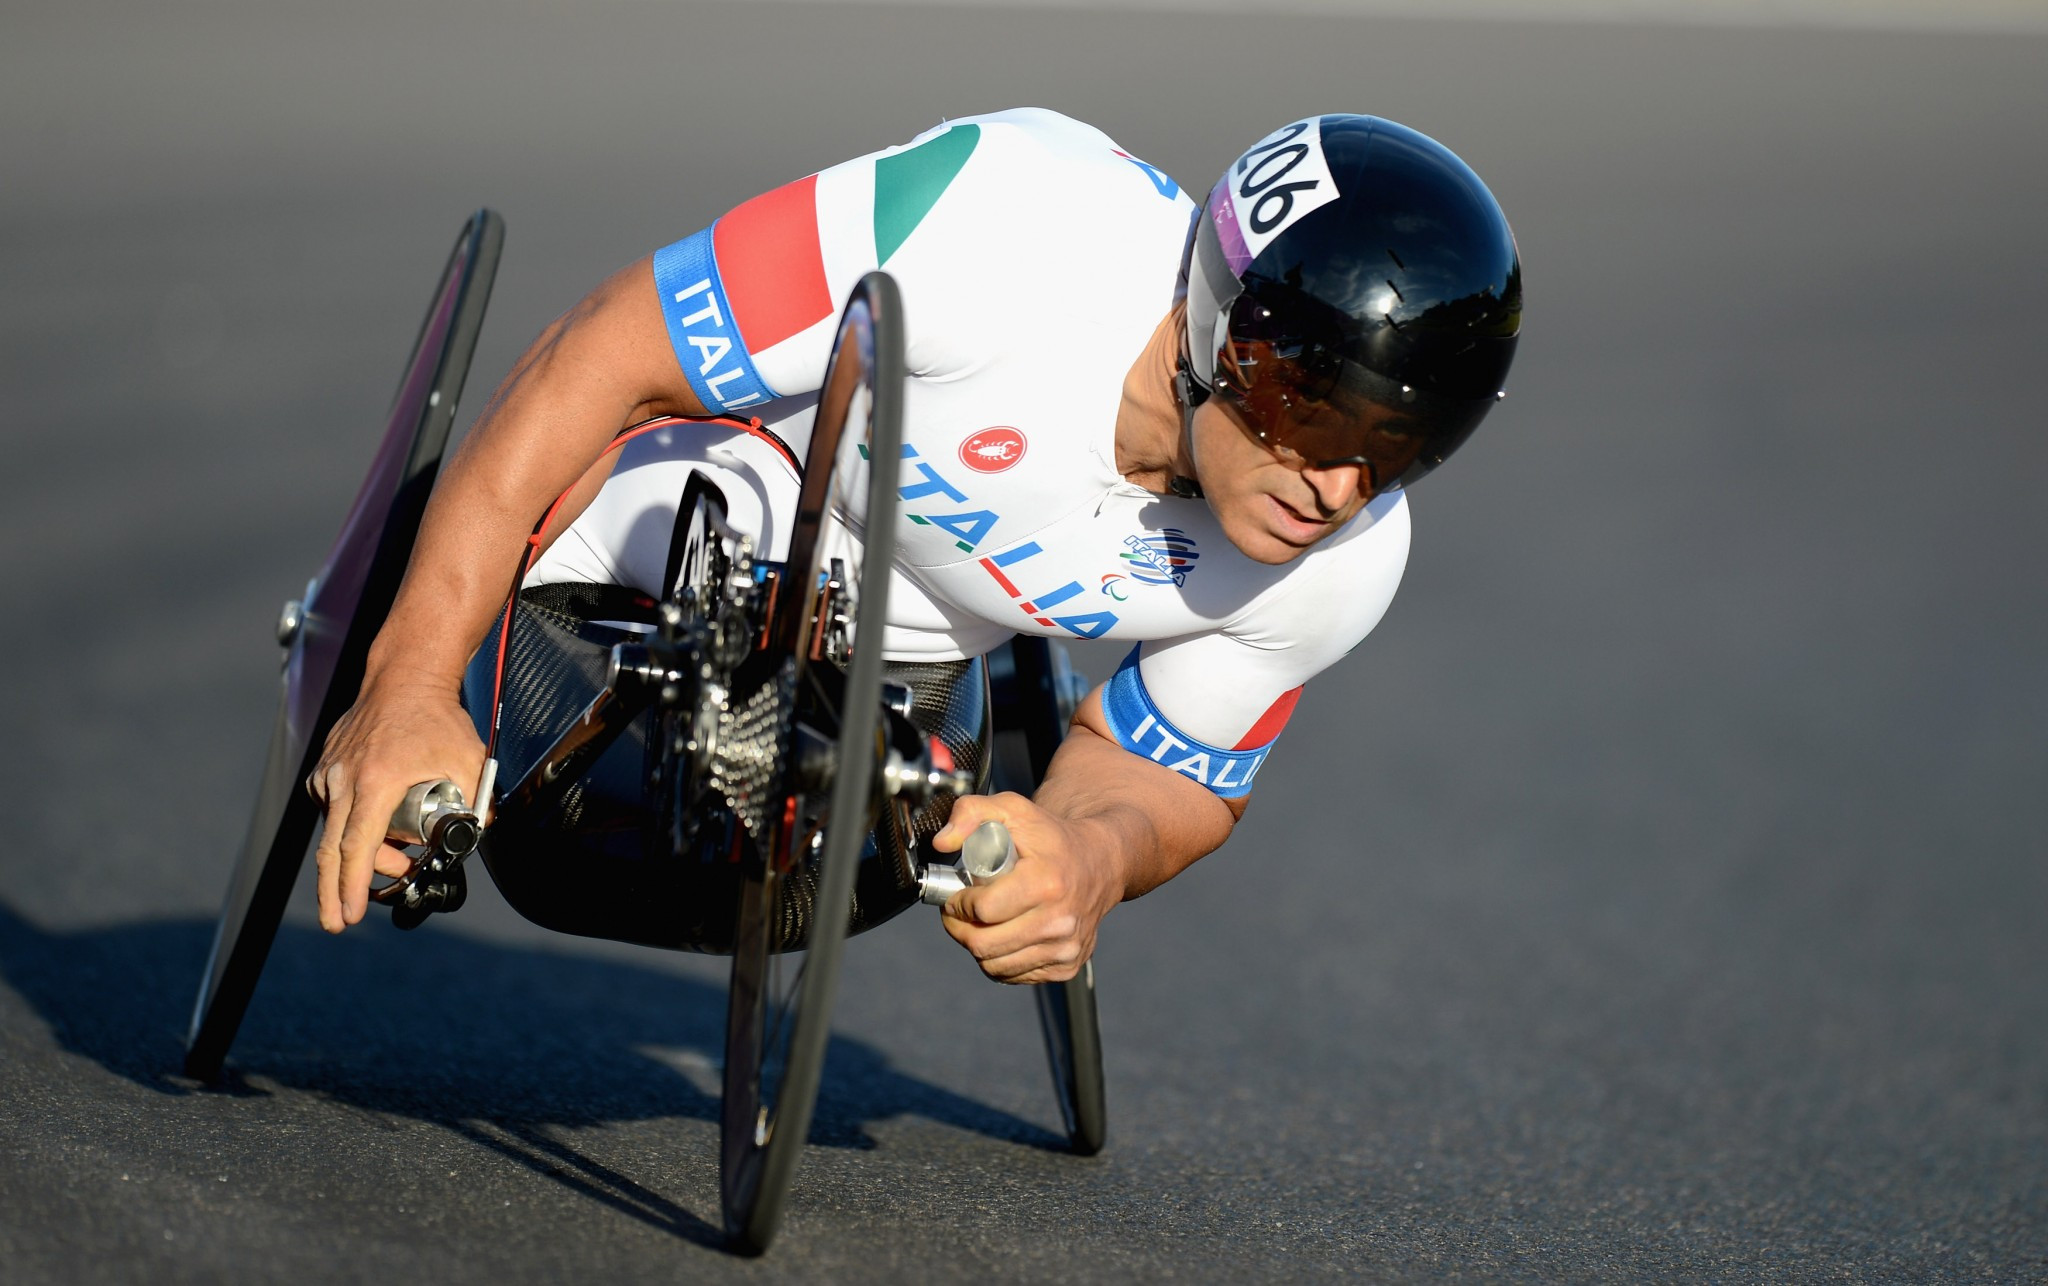 Alex Zanardi won gold on day one in South Africa ©Getty Images 